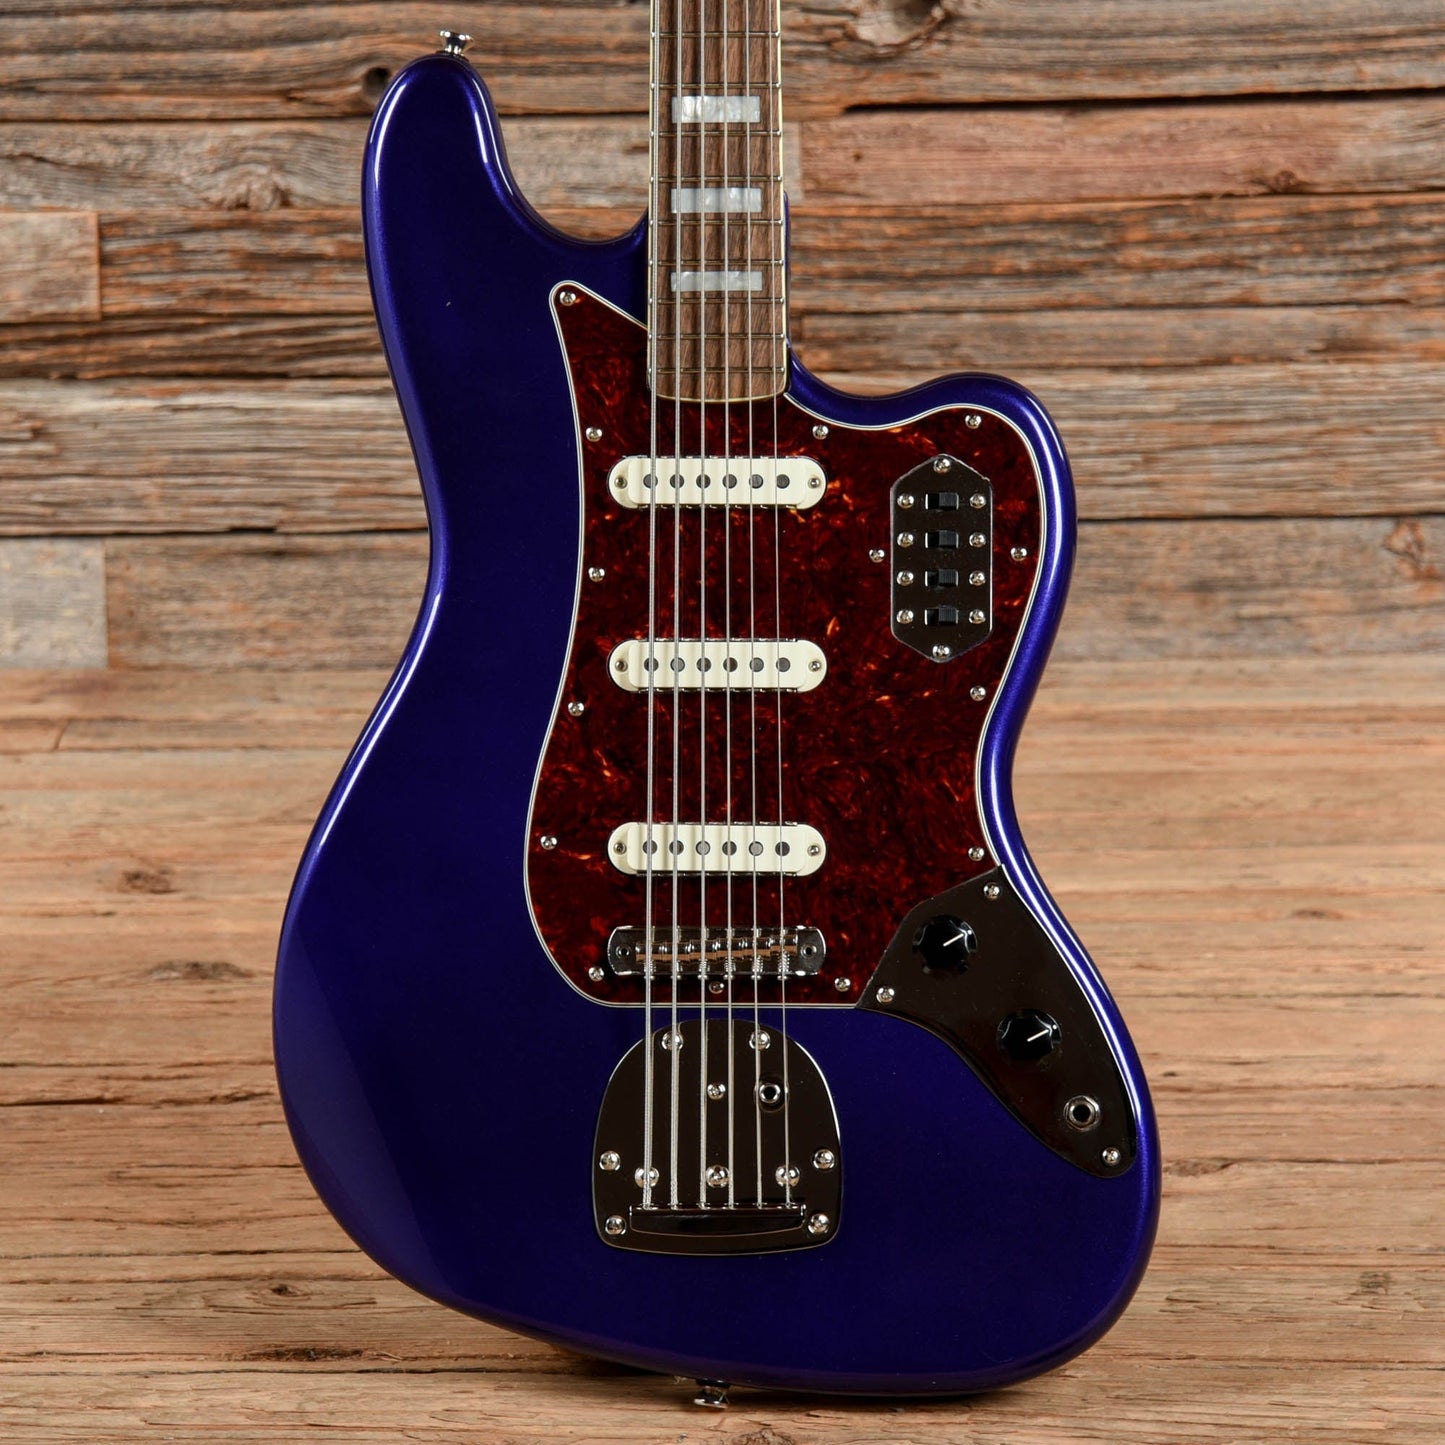 Squier Classic Vibe Bass VI CME Exclusive Purple Metallic 2022 Bass Guitars / 5-String or More